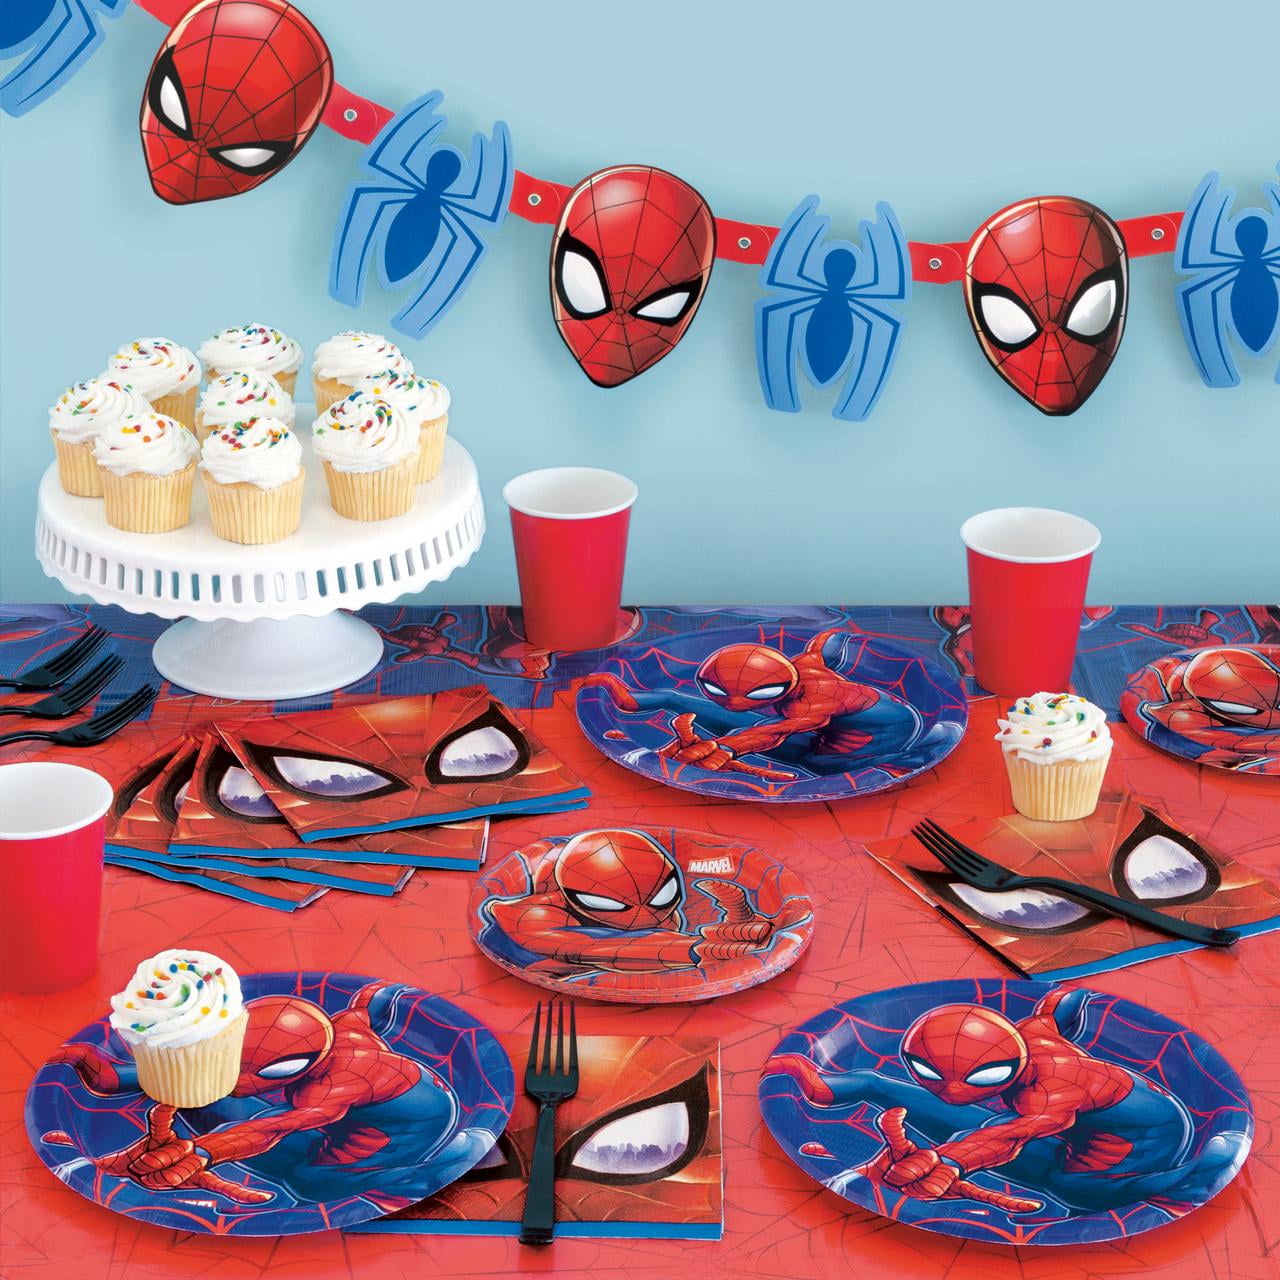 Character Cakes From the Bakery | Winn-Dixie